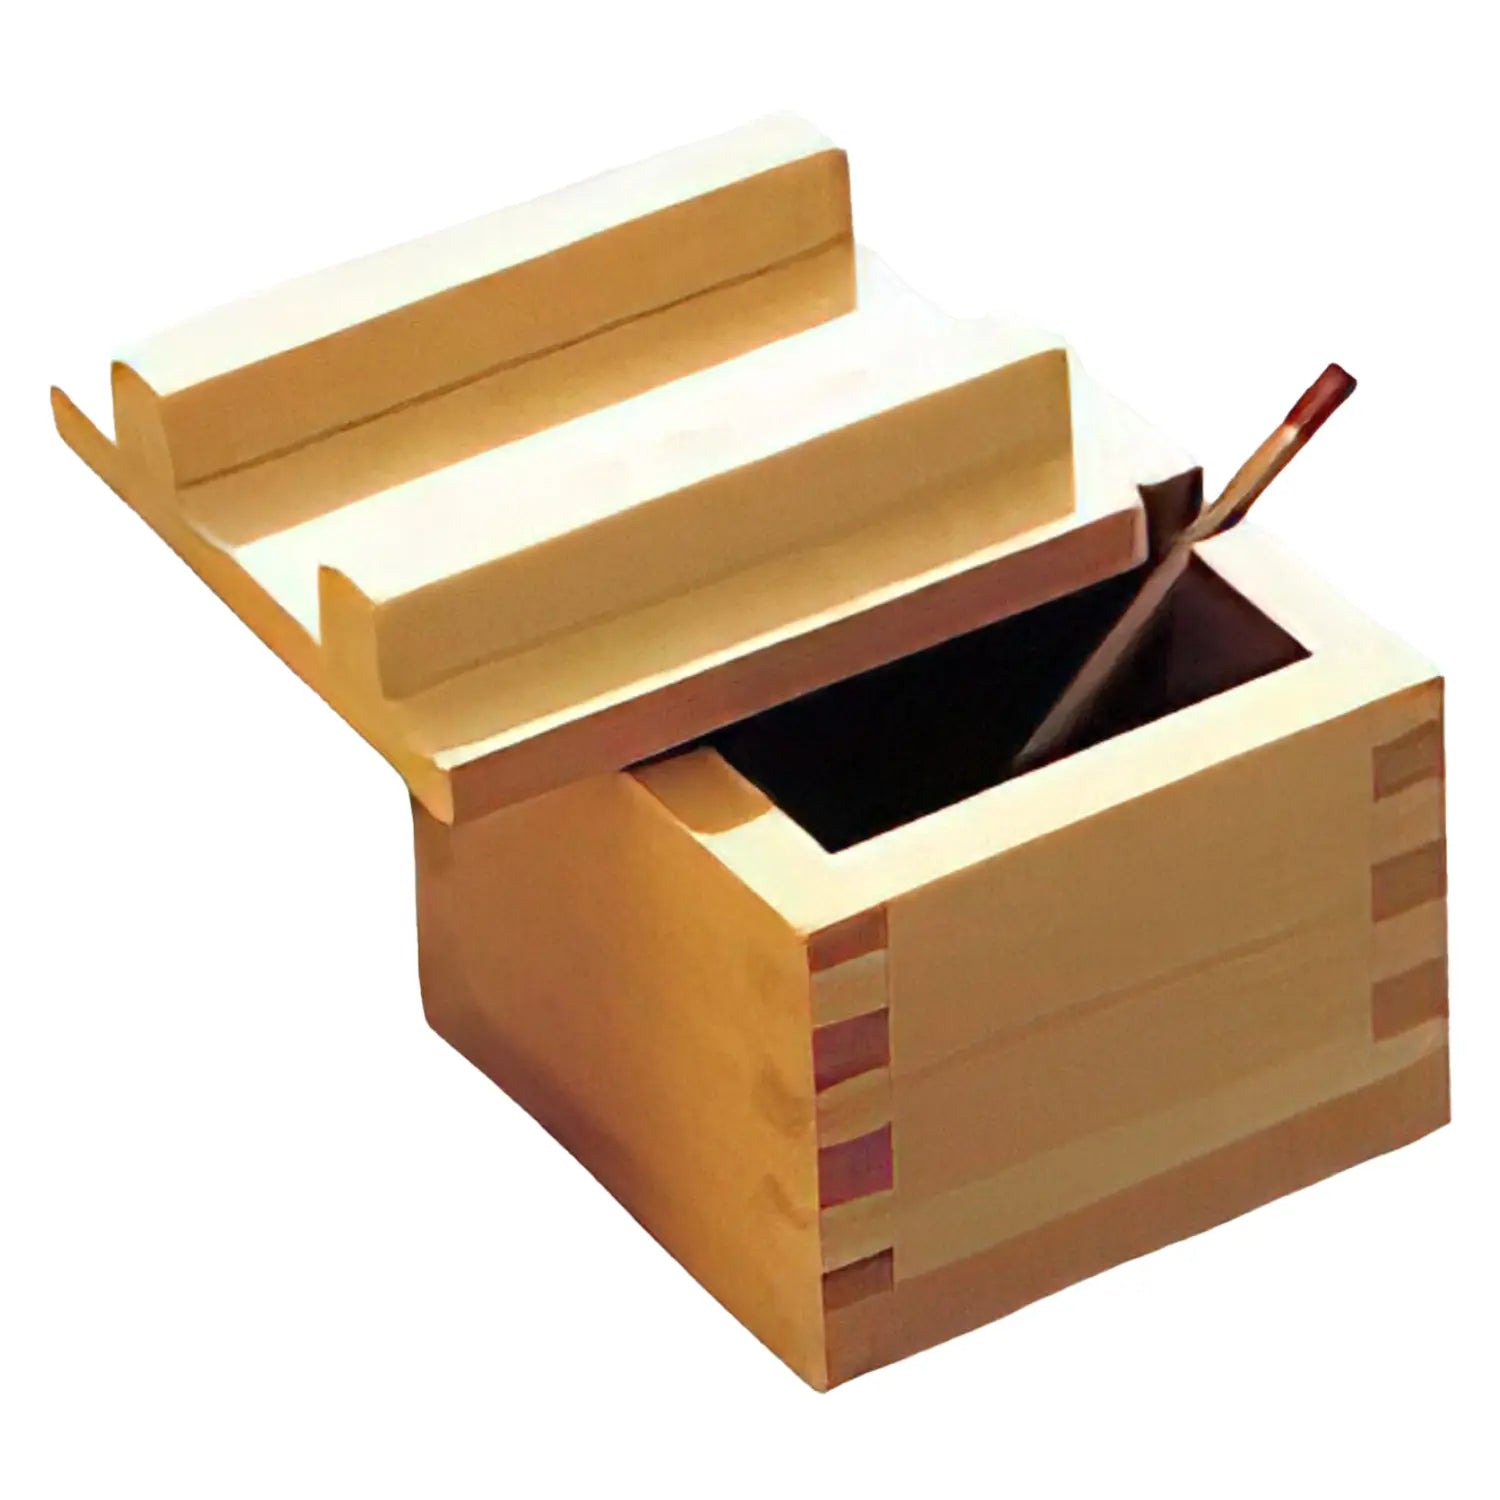 https://cdn.shopify.com/s/files/1/1610/3863/products/YamacohHinokiCypressWoodenCondimentsContainer19202_1_2000x.webp?v=1660287936